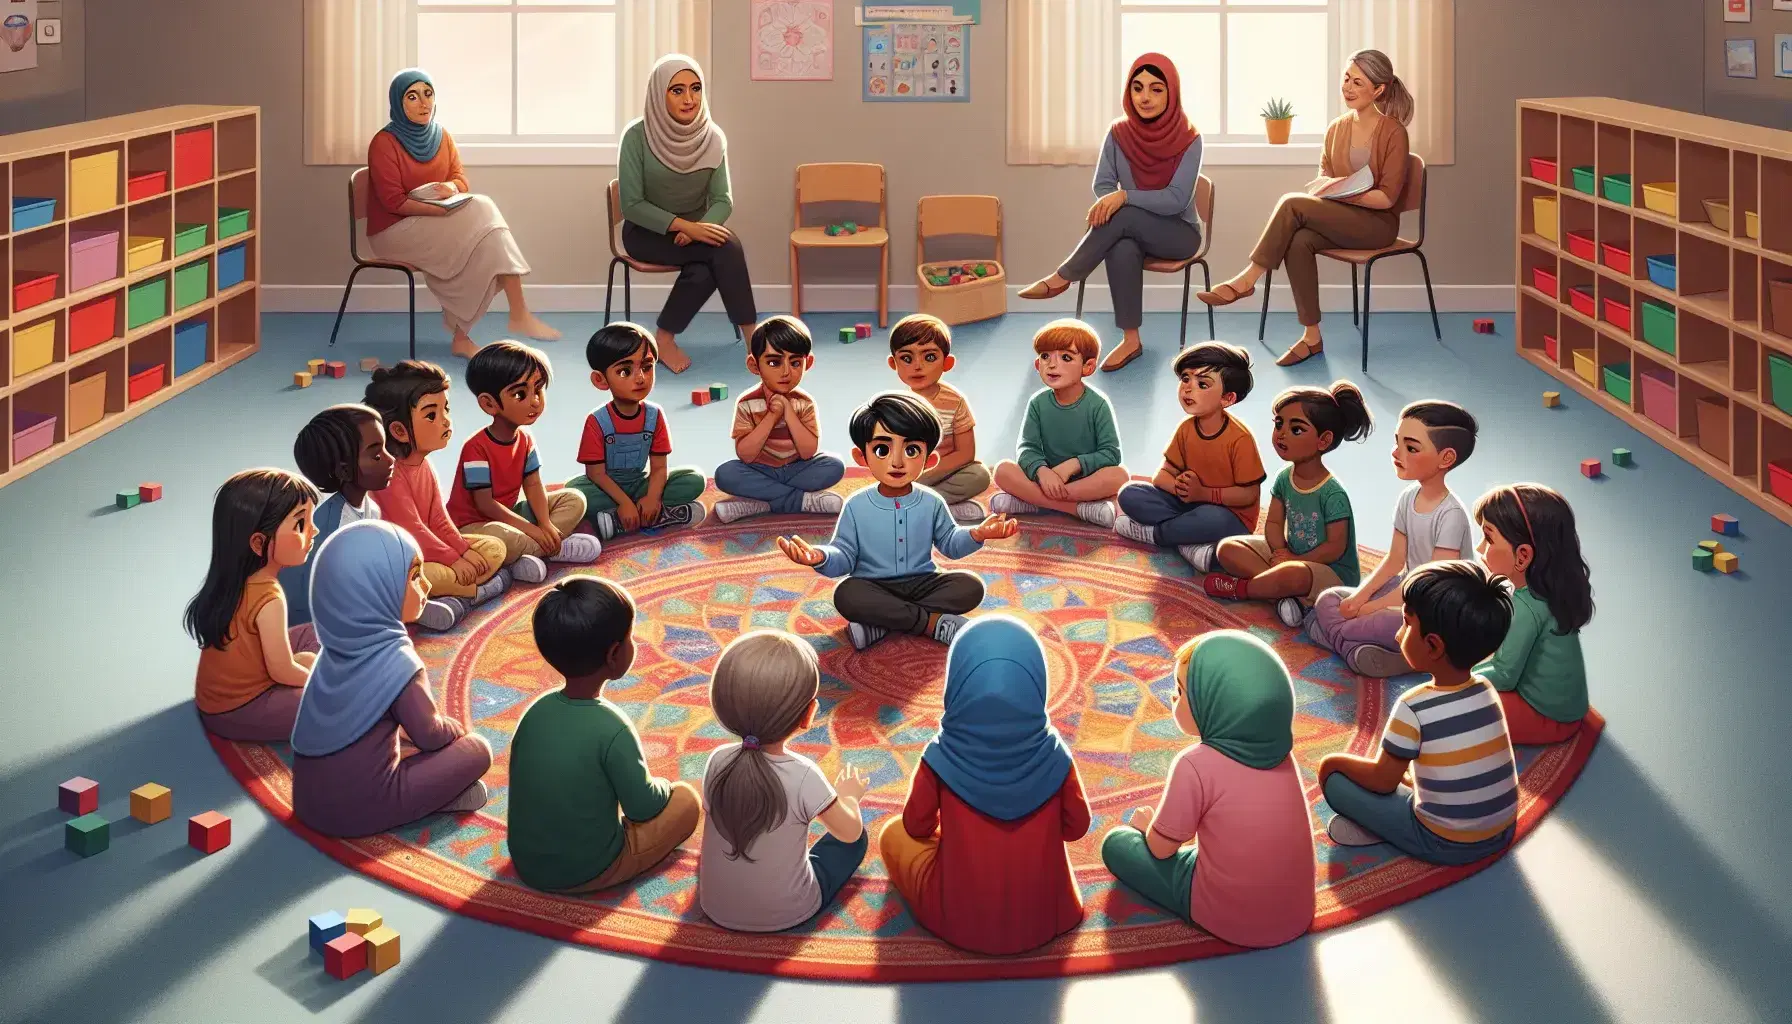 Diverse group of children engaged in a discussion on a colorful classroom rug, with a teacher observing, and educational toys scattered around.